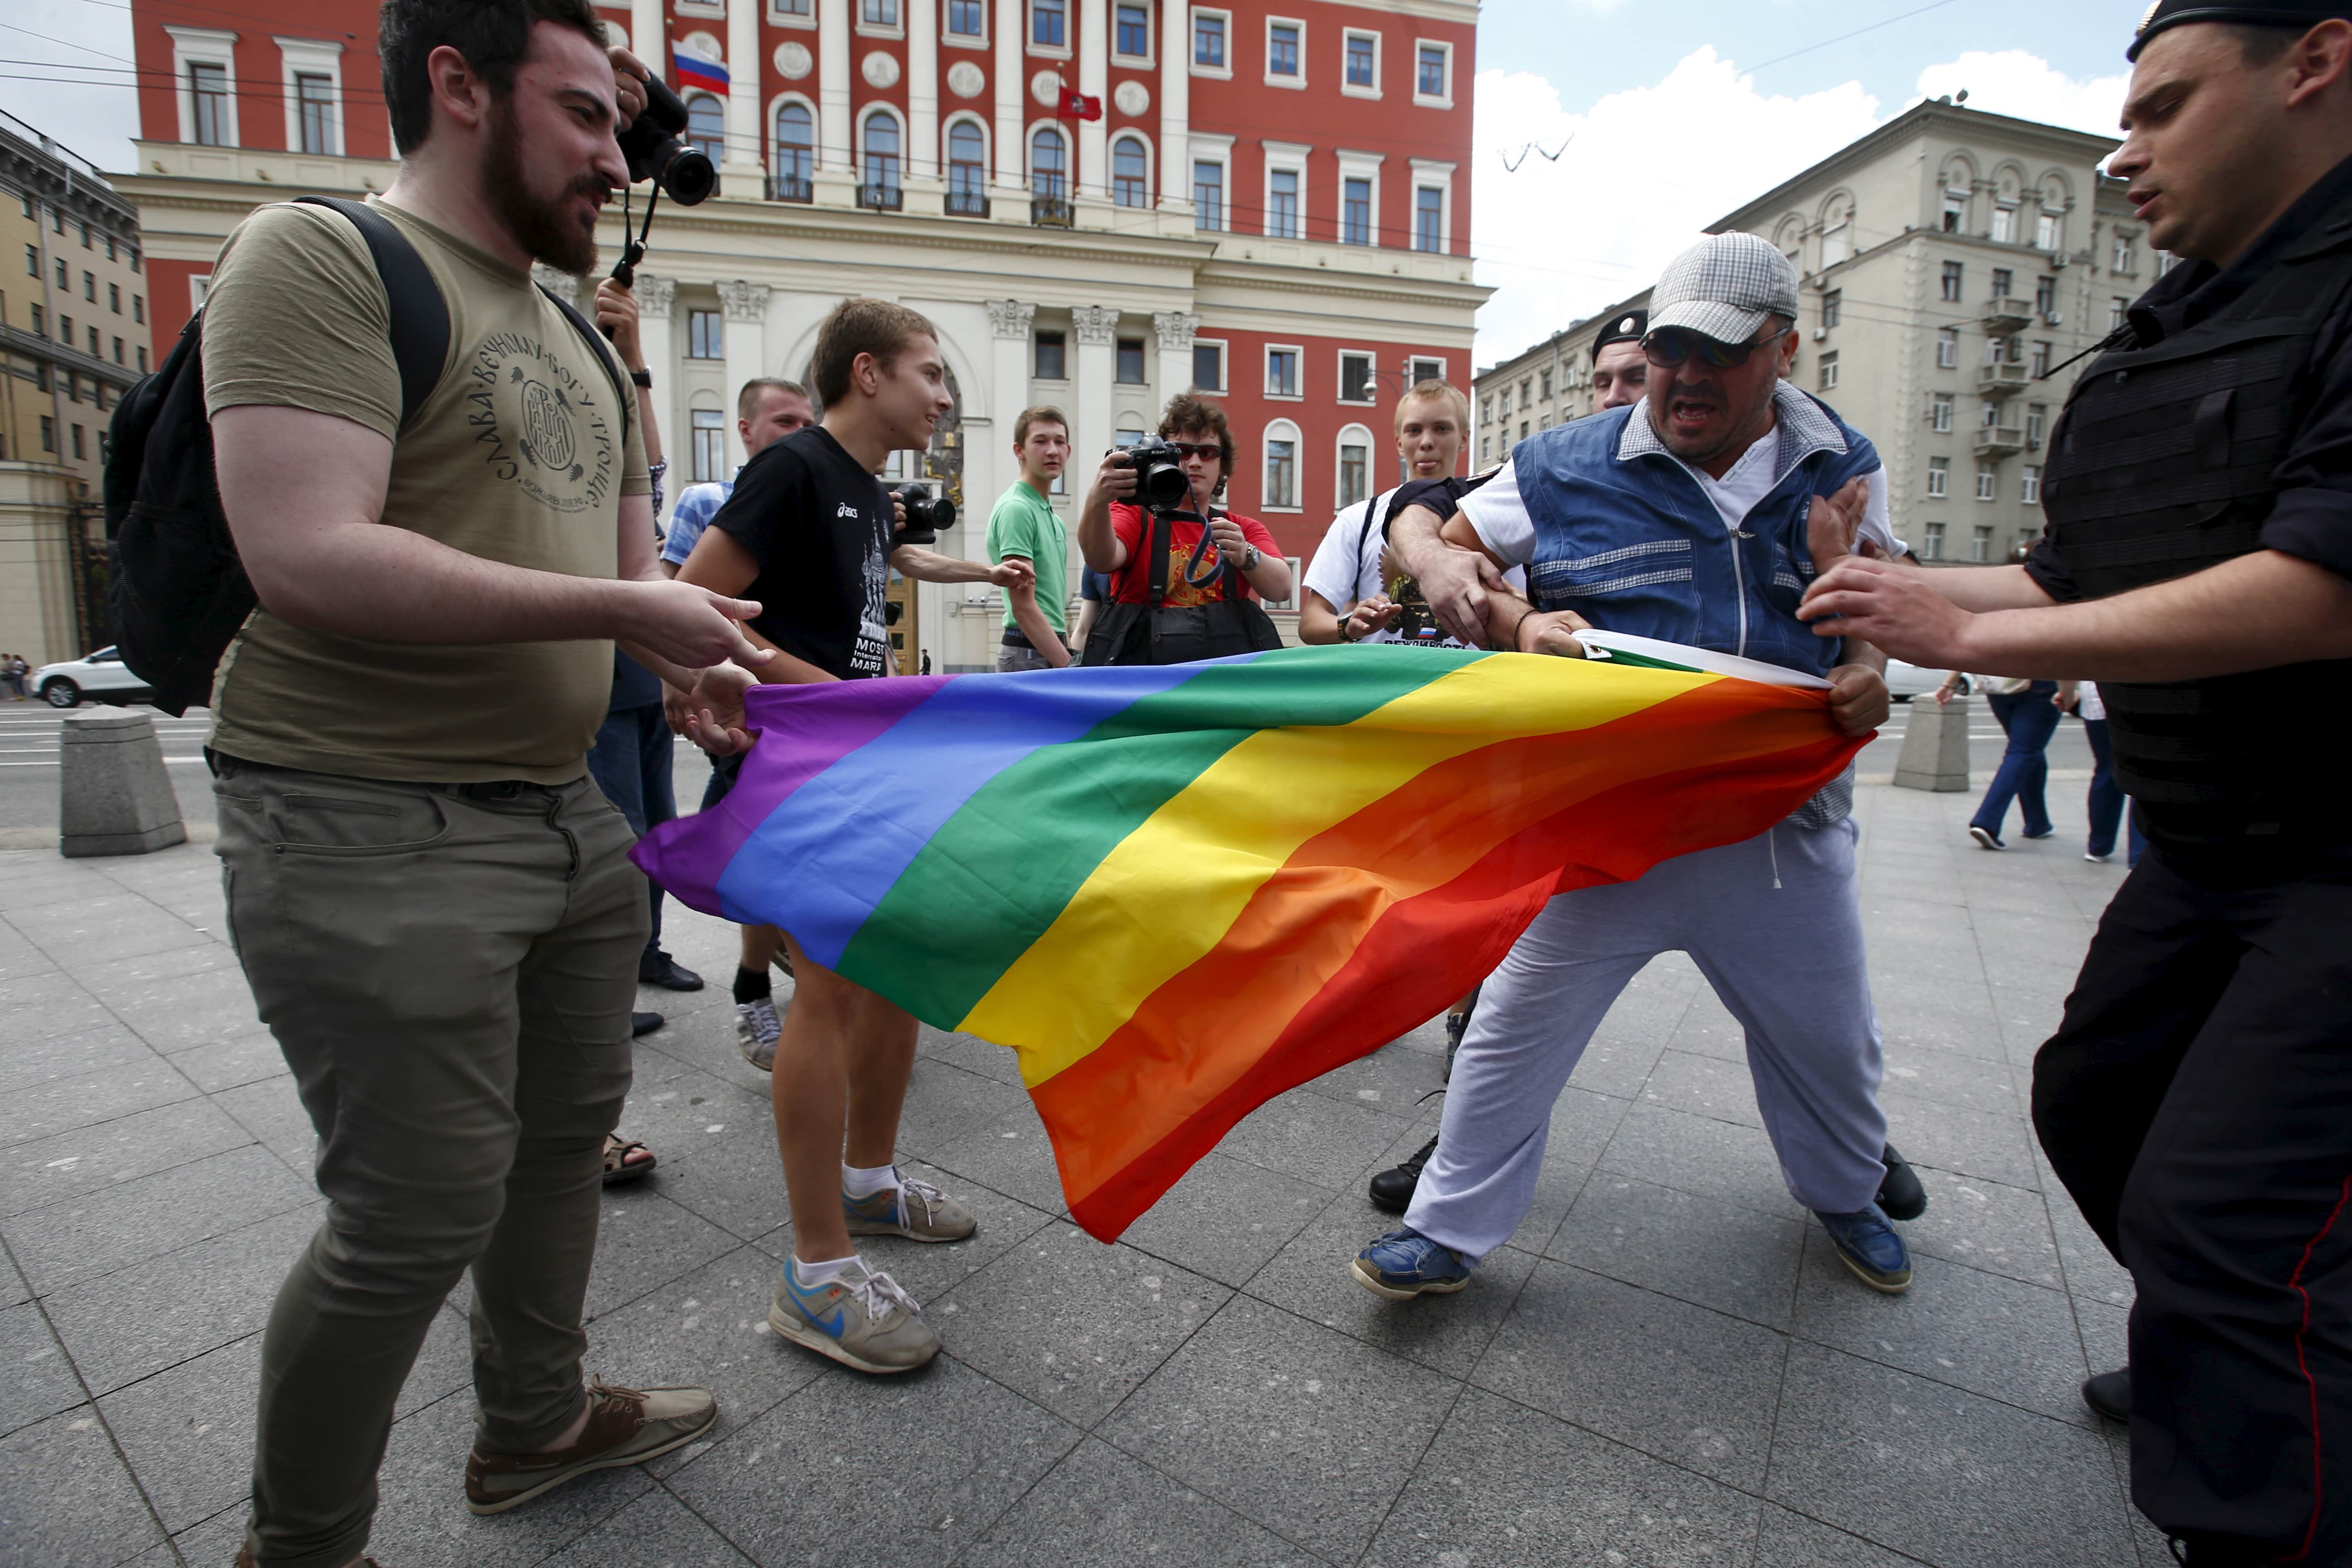 Anti-gay protesters try to tear a rainbow flag during an LGBT community rally in Moscow, 30 May 2015, REUTERS/Maxim Zmeyev